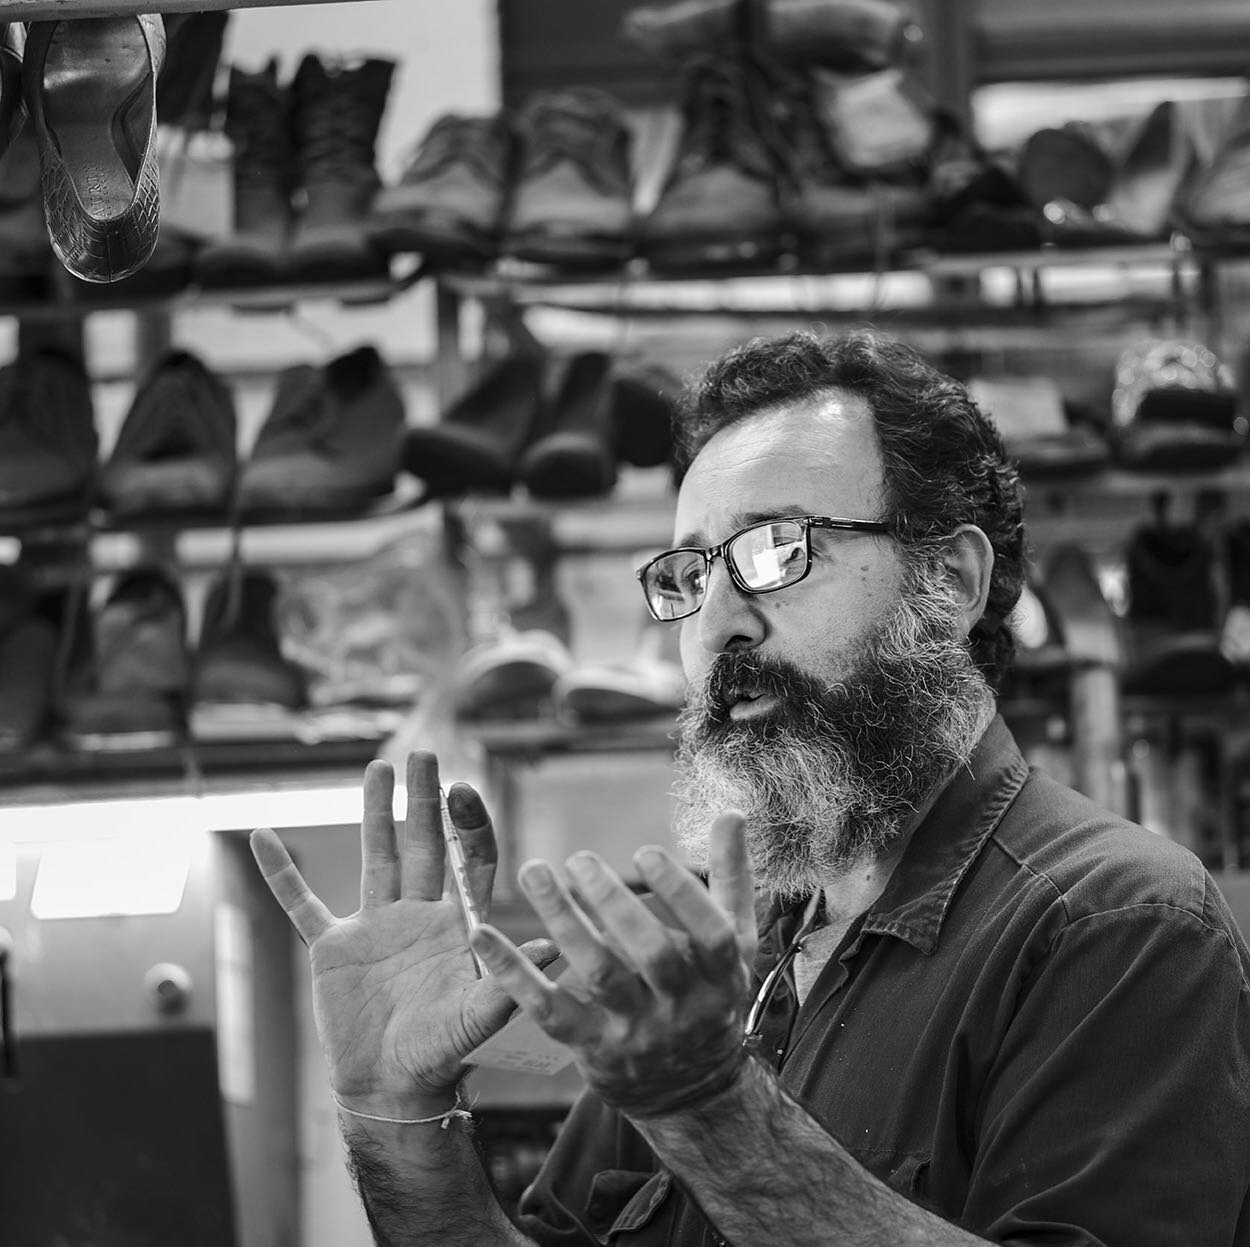 John the shoe repair guy in DTLA explains how he will repair the lady&rsquo;s high heels. He loves what he does. I talk to him and Ben every day when I get groceries. Best repair shop by far . For all leather products. 

Photographed wity Leica M mon